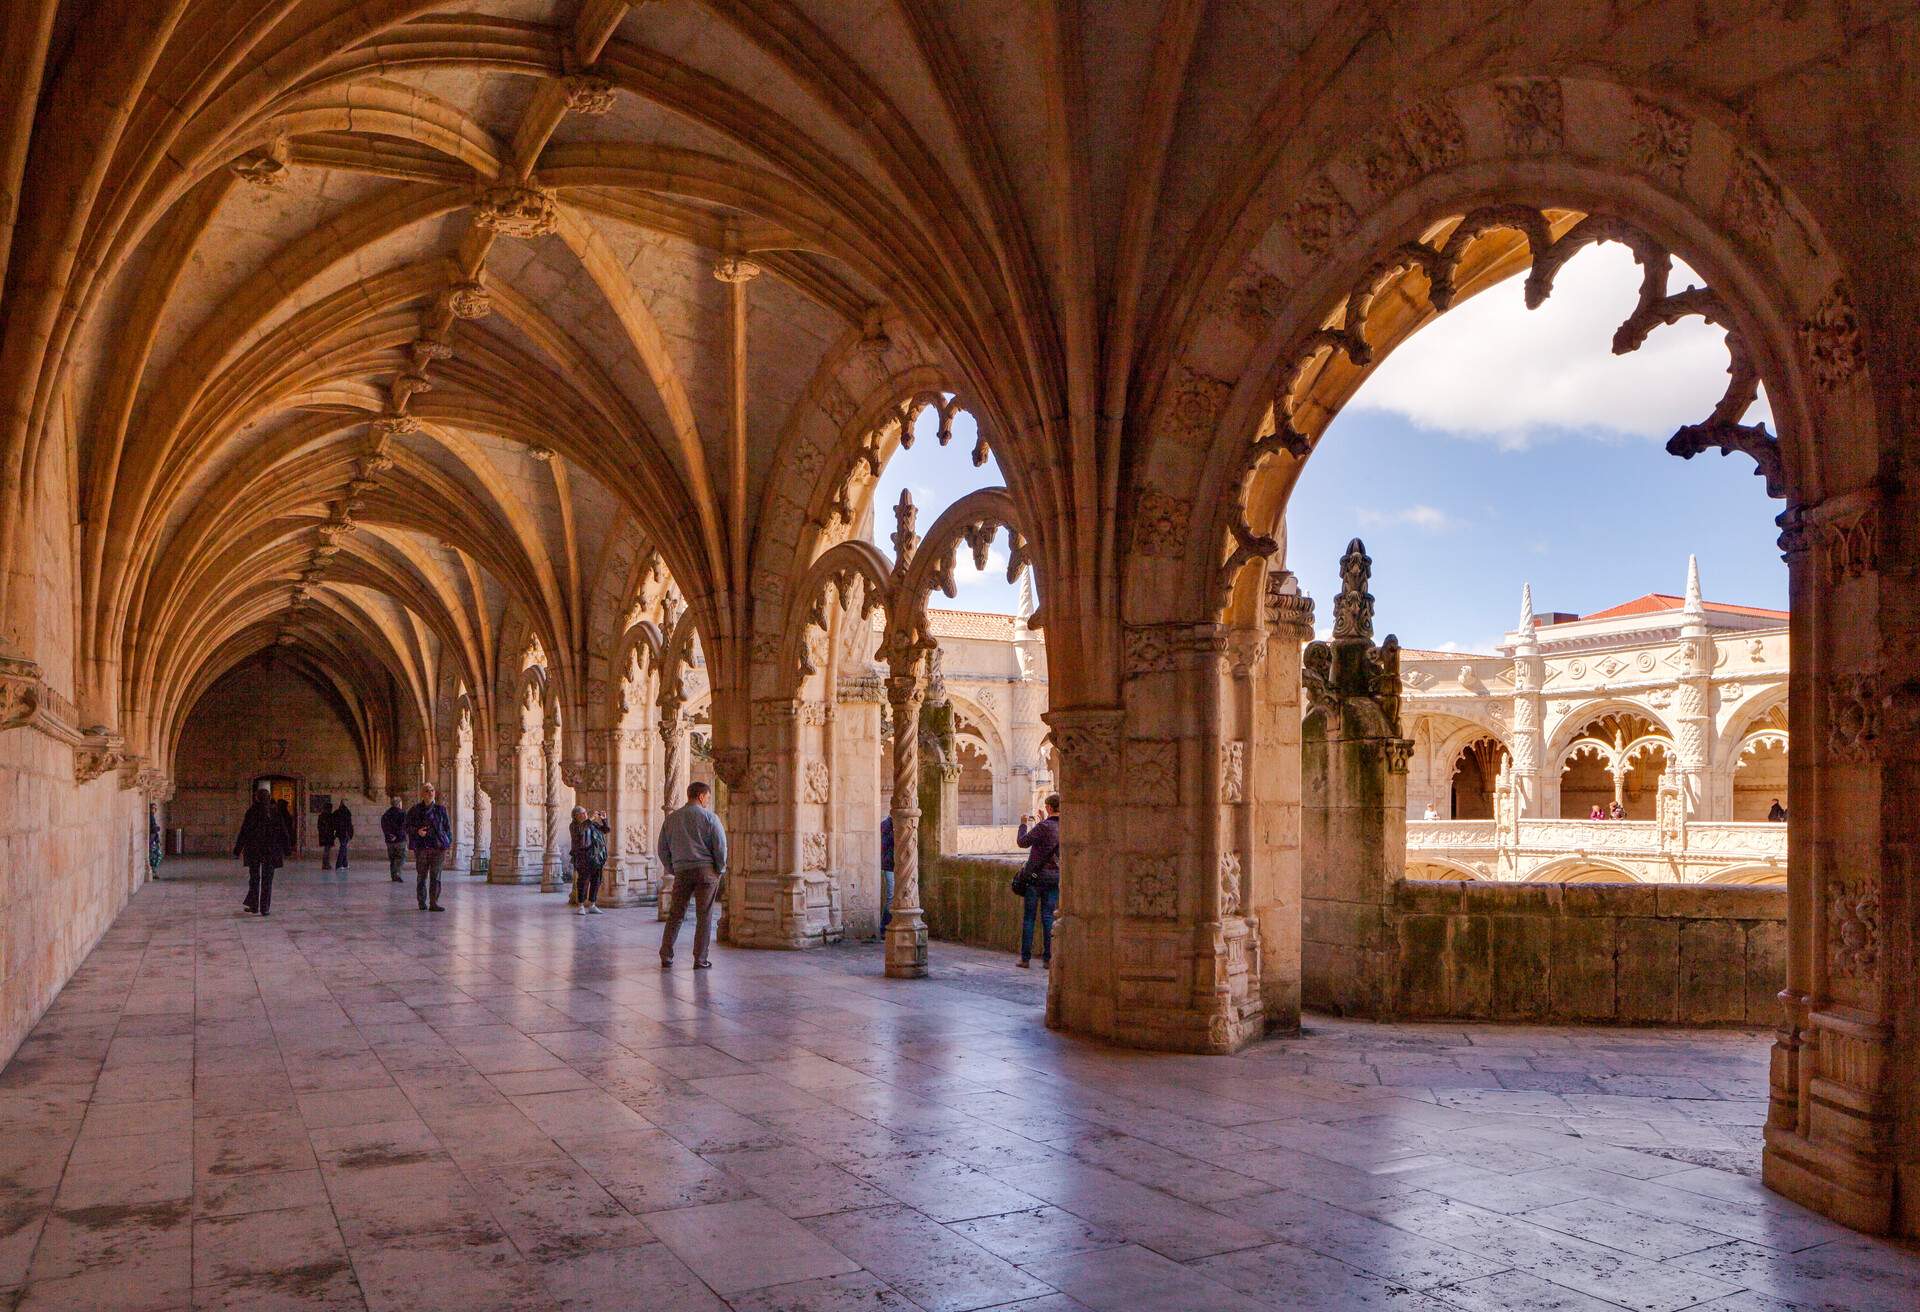 Cloister in Mosteiro dos Jeronimos in Lisbon, Portugal. The monastery is one of the most prominent examples of the Portuguese Late Gothic Manueline style of architecture in Lisbon. It was classified a UNESCO World Heritage Site in 1983.